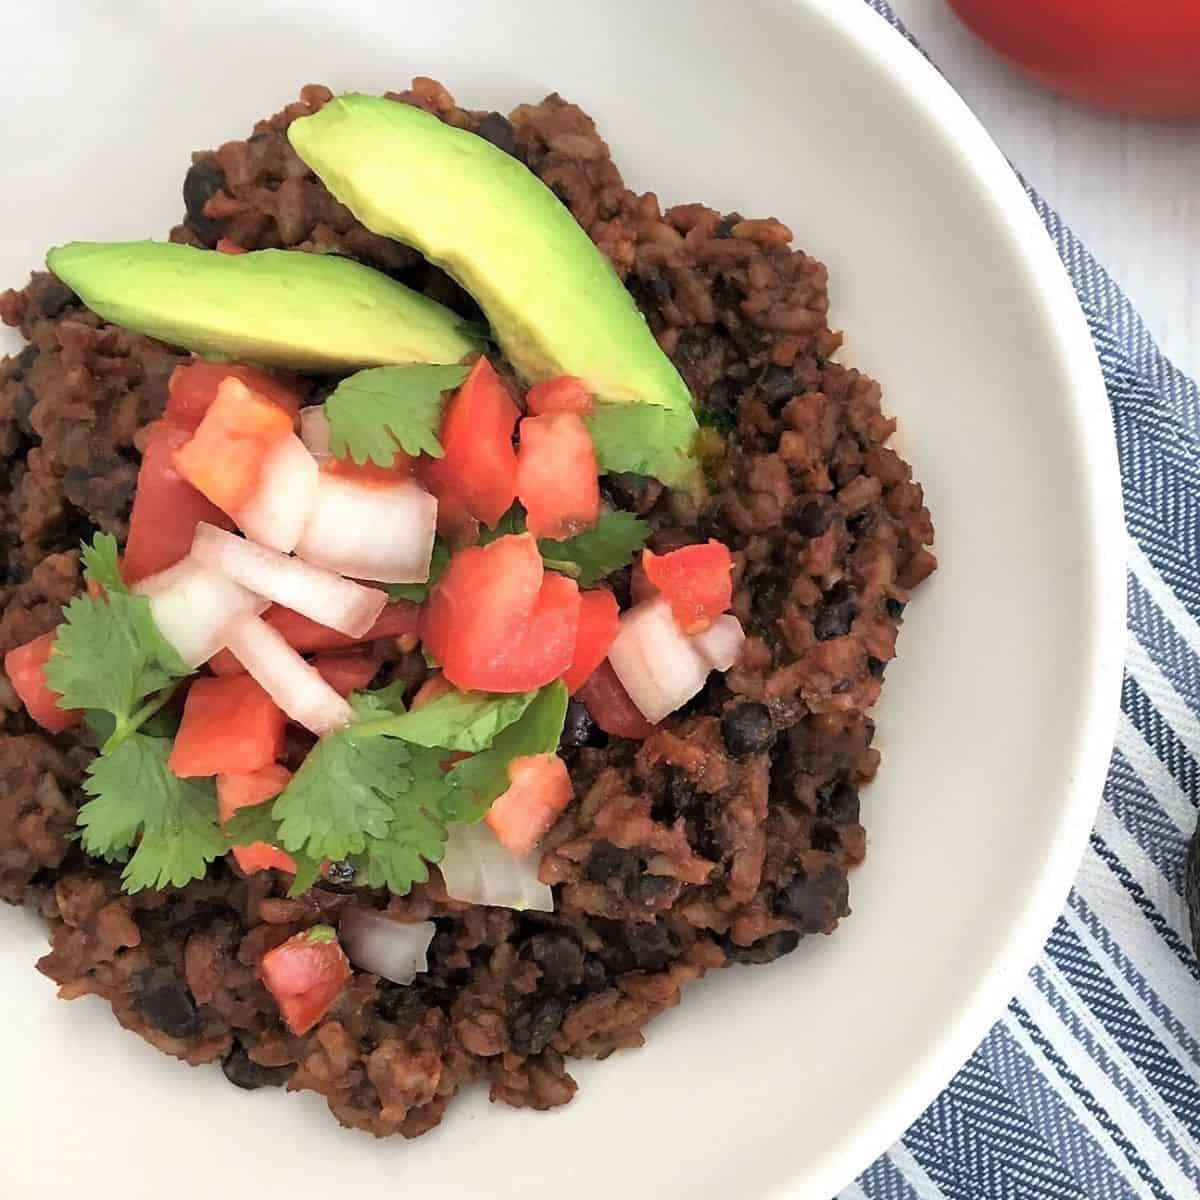 Rice and beans in bowl with onion, tomato, cilantro, and avocado on top.